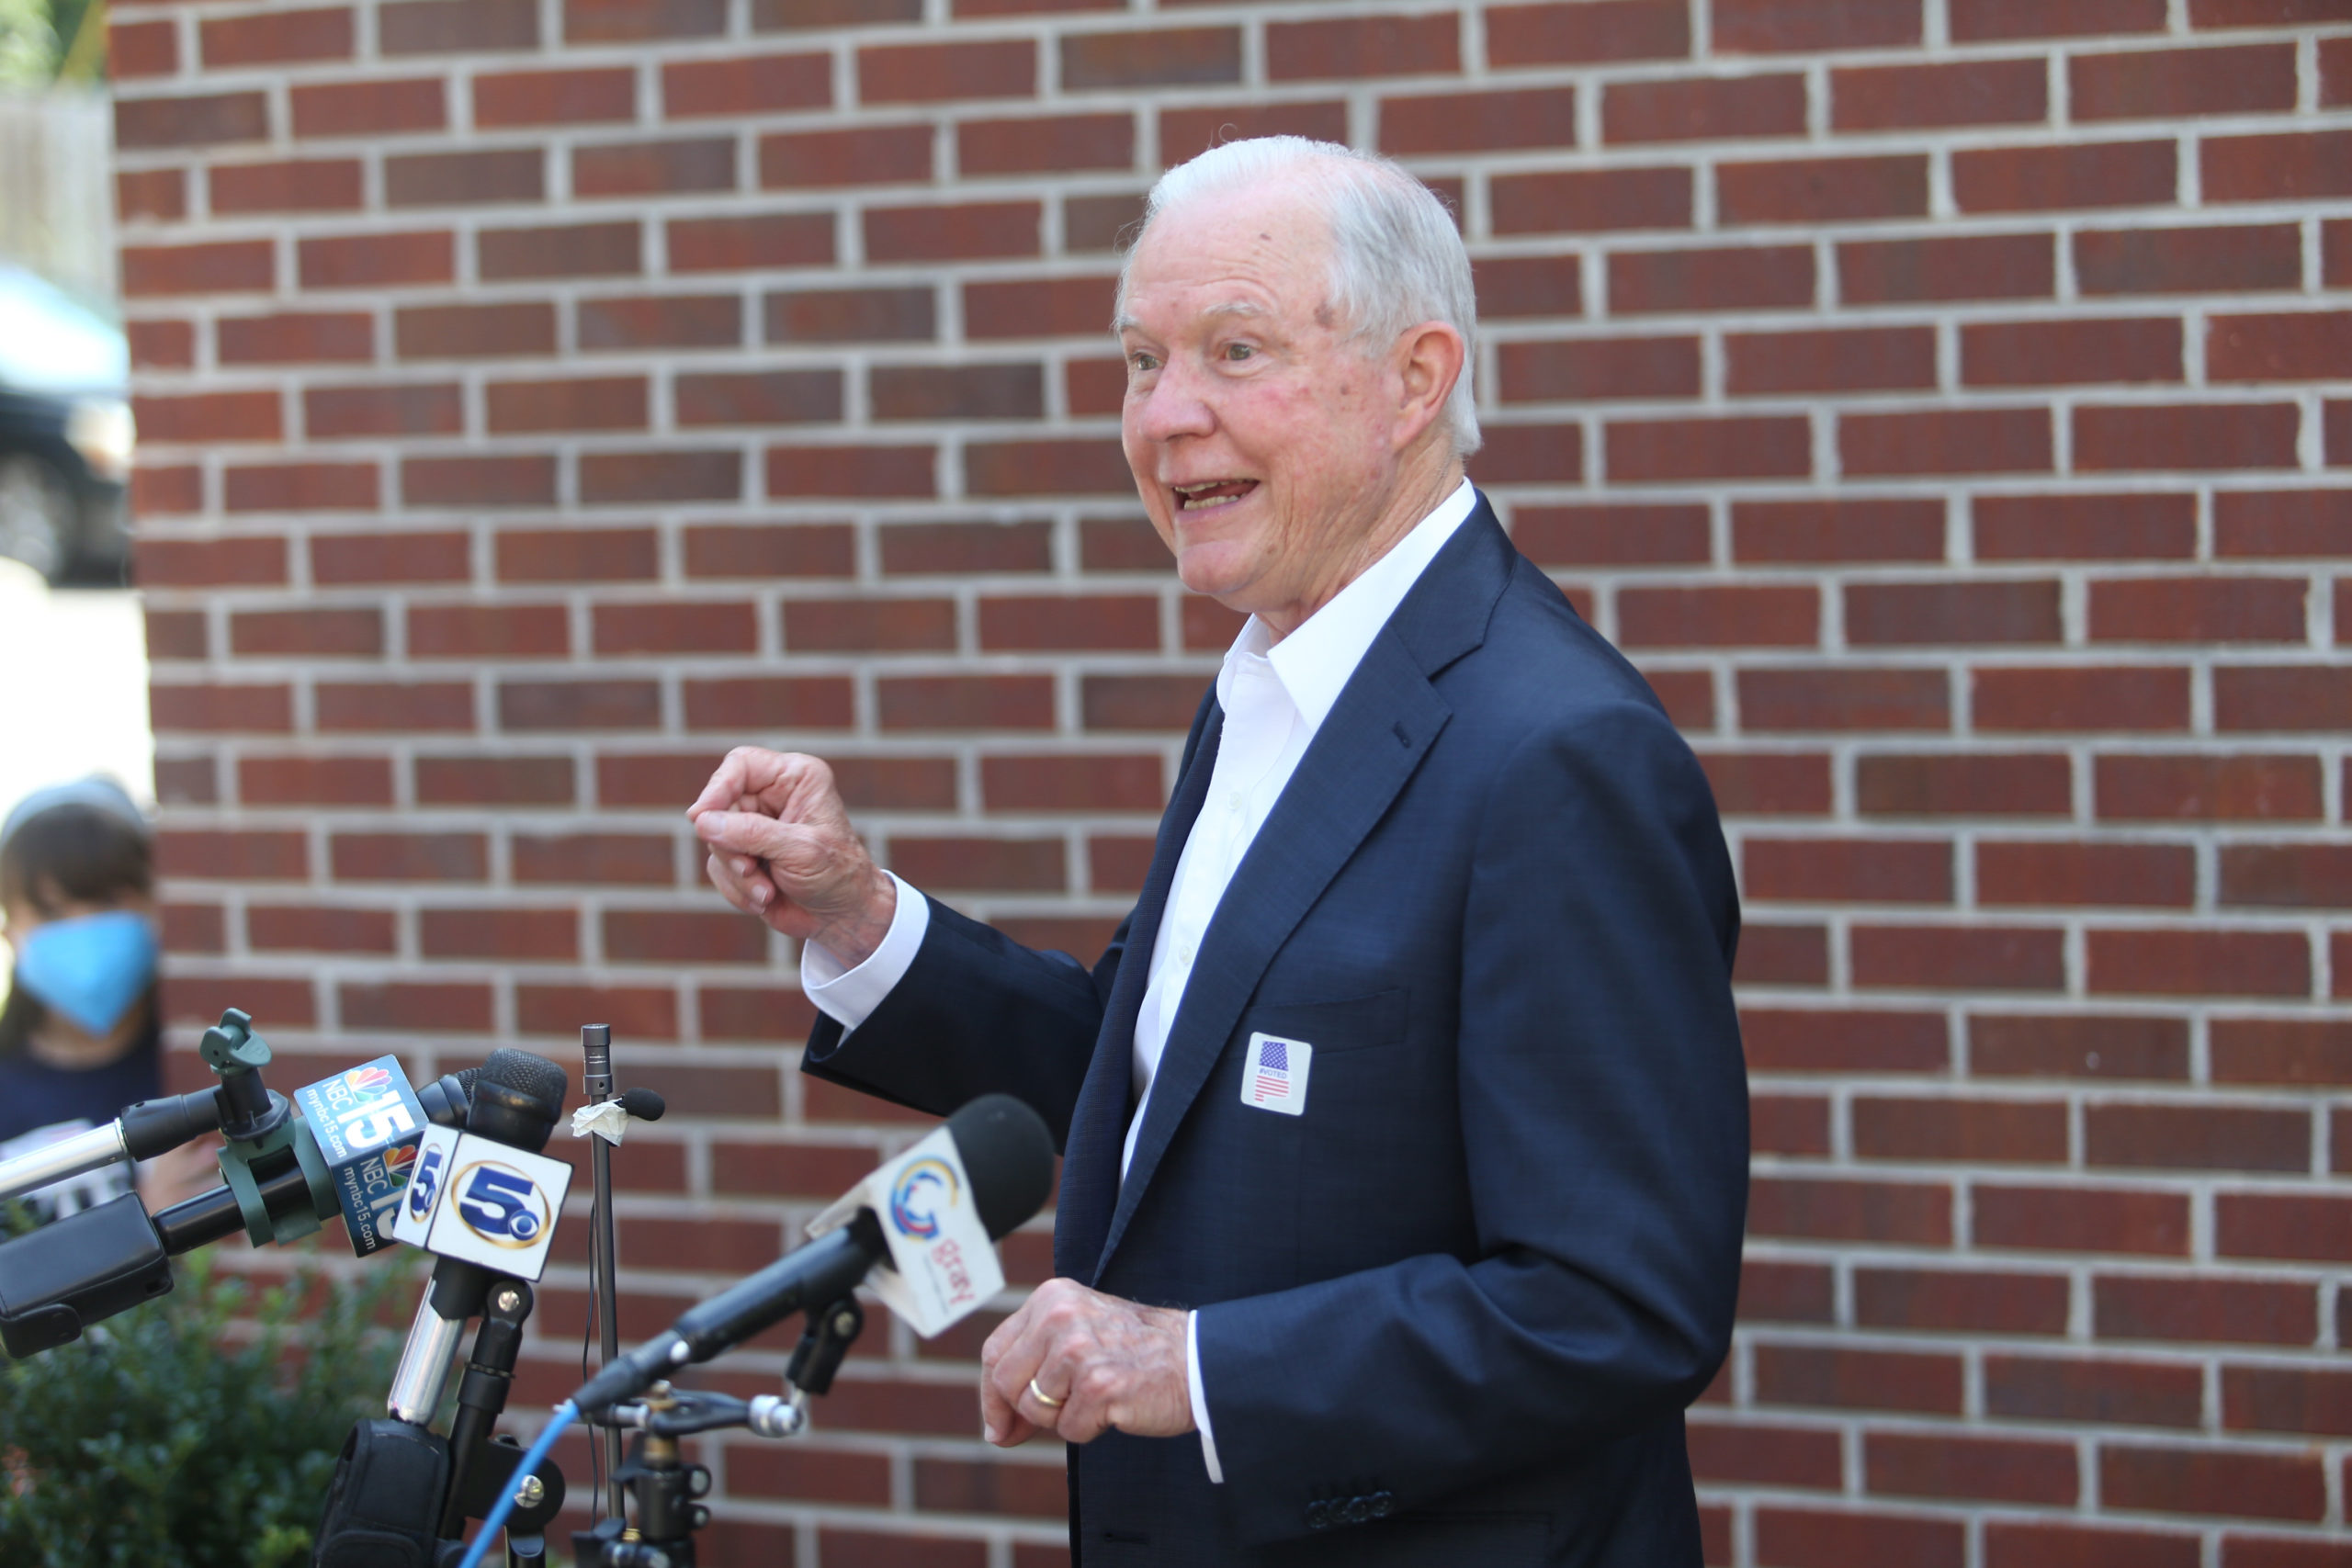 Jeff Sessions addresses the media after voting in the Alabama Republican primary runoff for the U.S. Senate on July 14, 2020 in Mobile, Alabama.